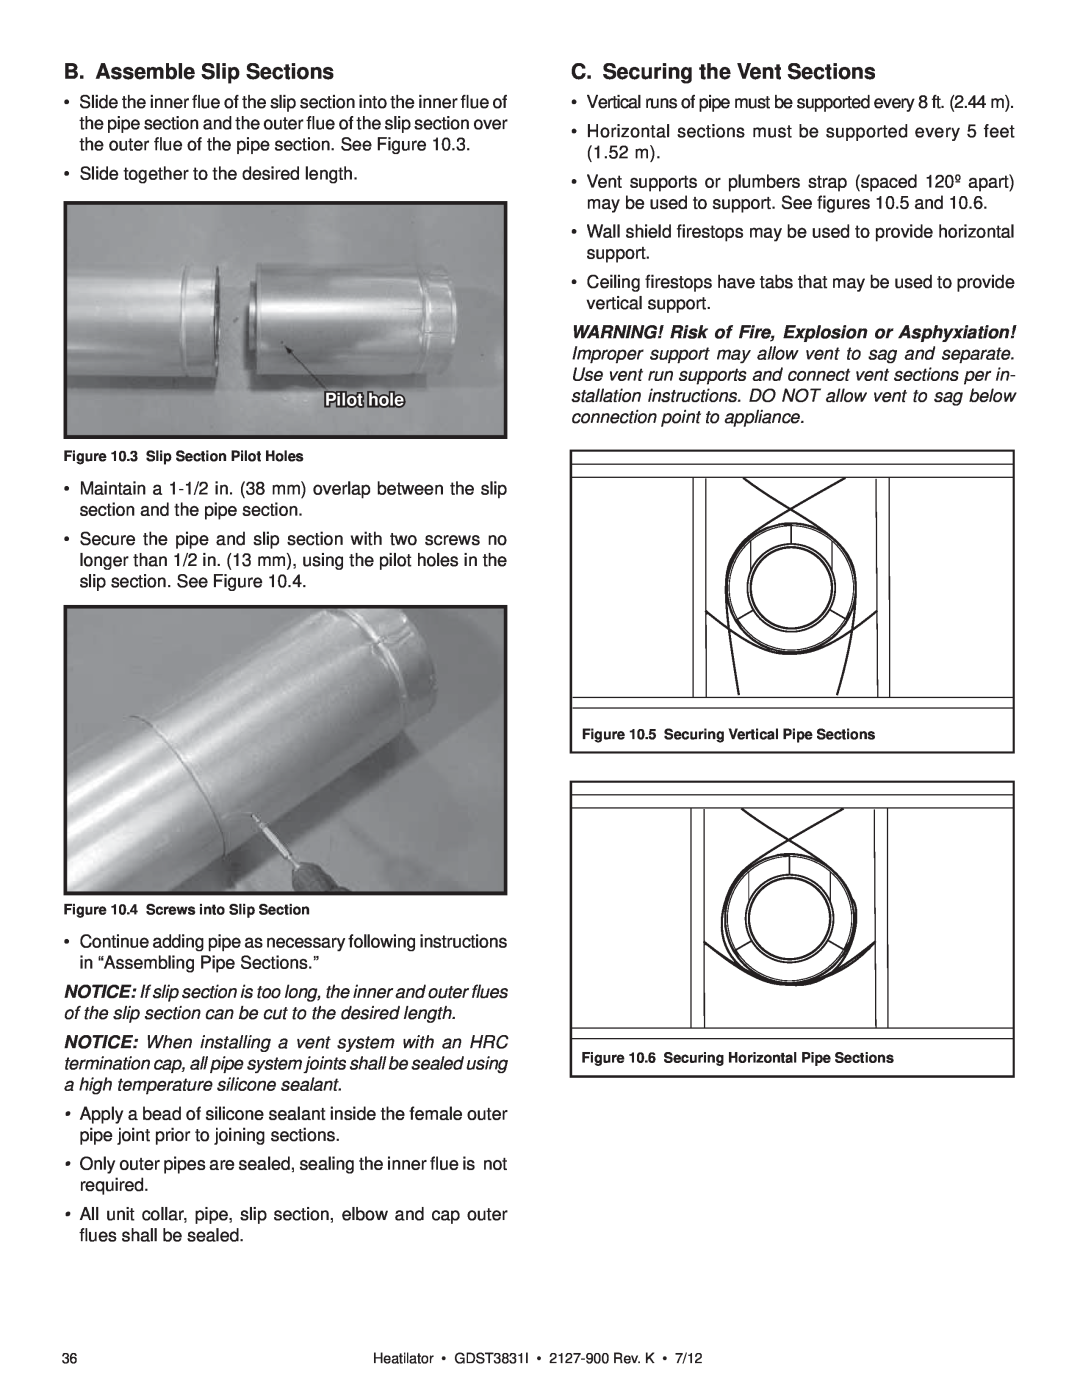 Heatiator GDST3831I owner manual B. Assemble Slip Sections, C. Securing the Vent Sections, Pilot hole 